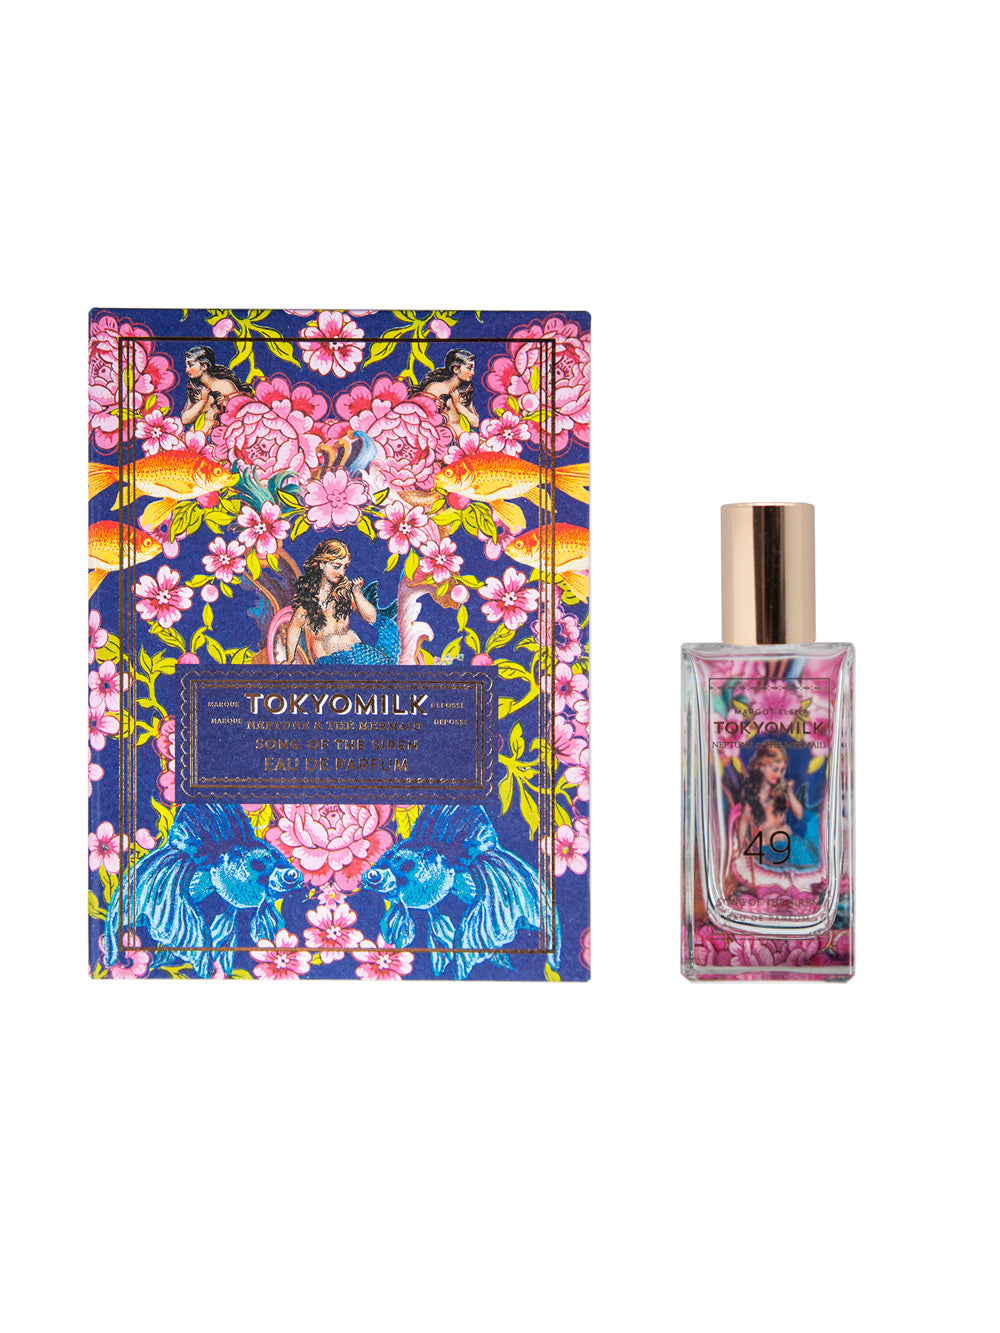 A bottle of Margot Elena TokyoMilk Neptune & The Mermaid Song of the Siren No. 49 Parfum beside its decorative packaging, featuring vibrant floral patterns and a vintage-style illustration of a woman surrounded by rosewater-scent.